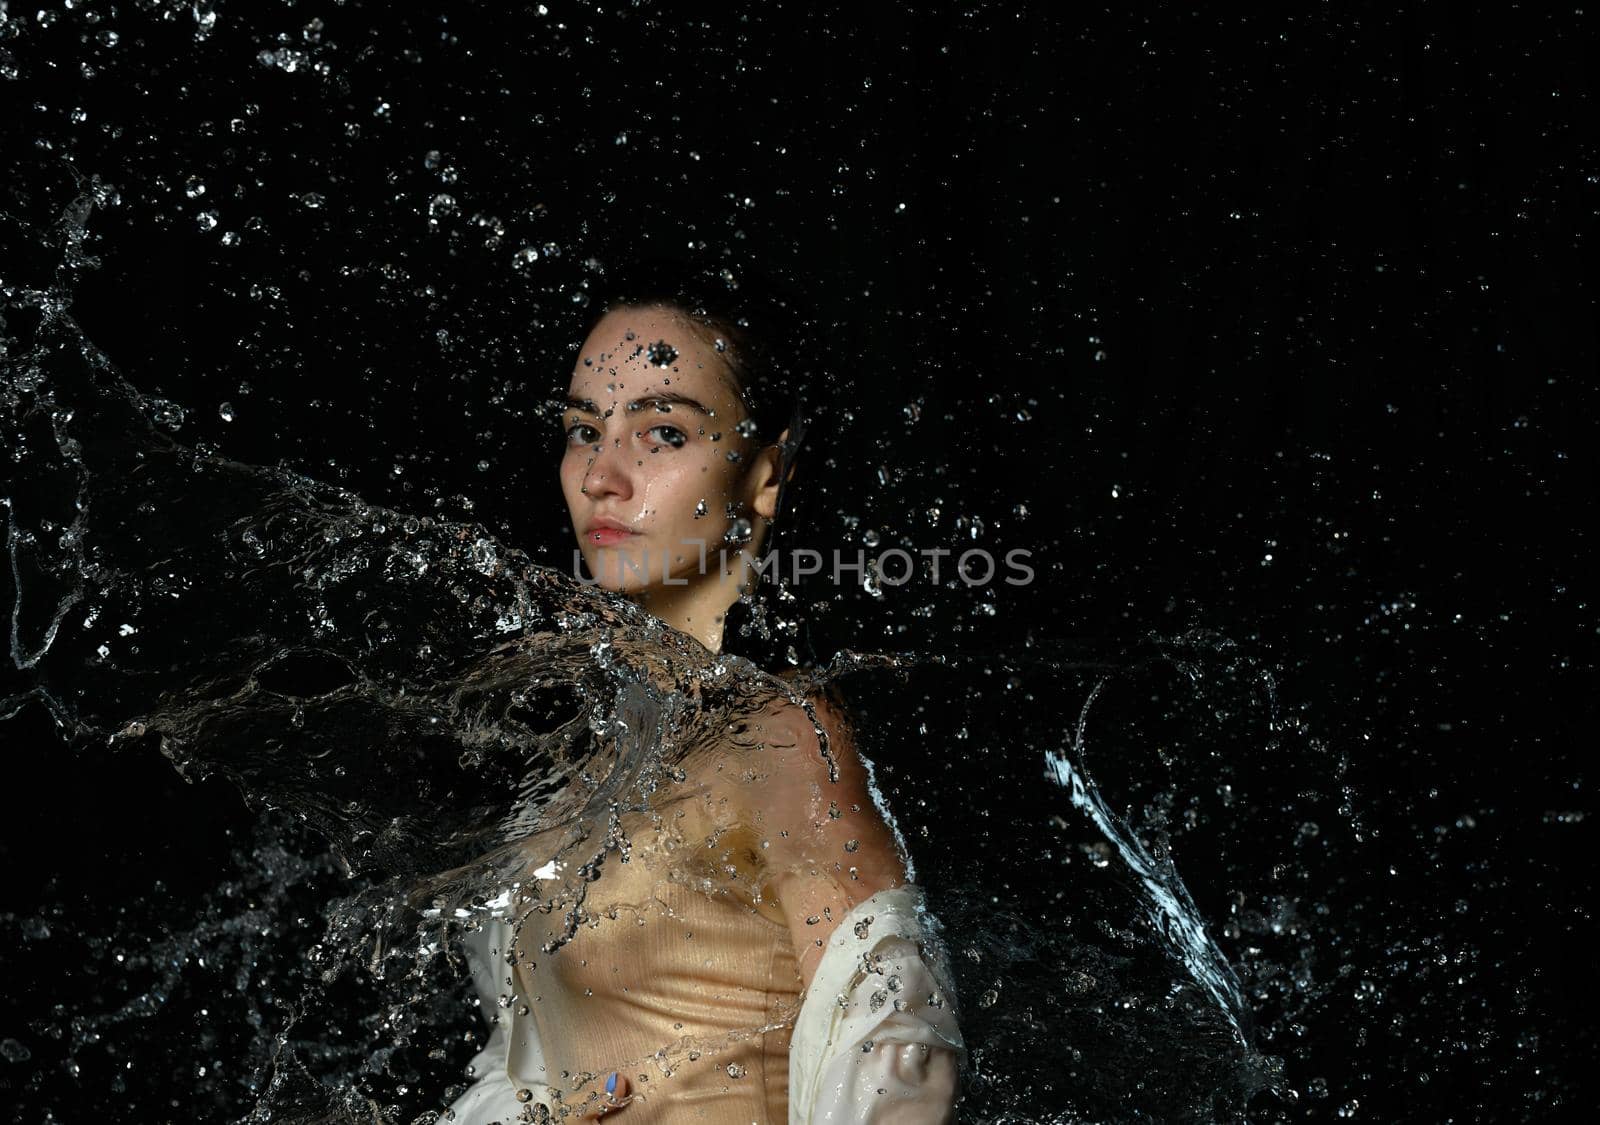 beautiful young woman of Caucasian appearance with black hair stands in drops of water on a black background. Woman wearing white shirt and looking at the camera, serious face